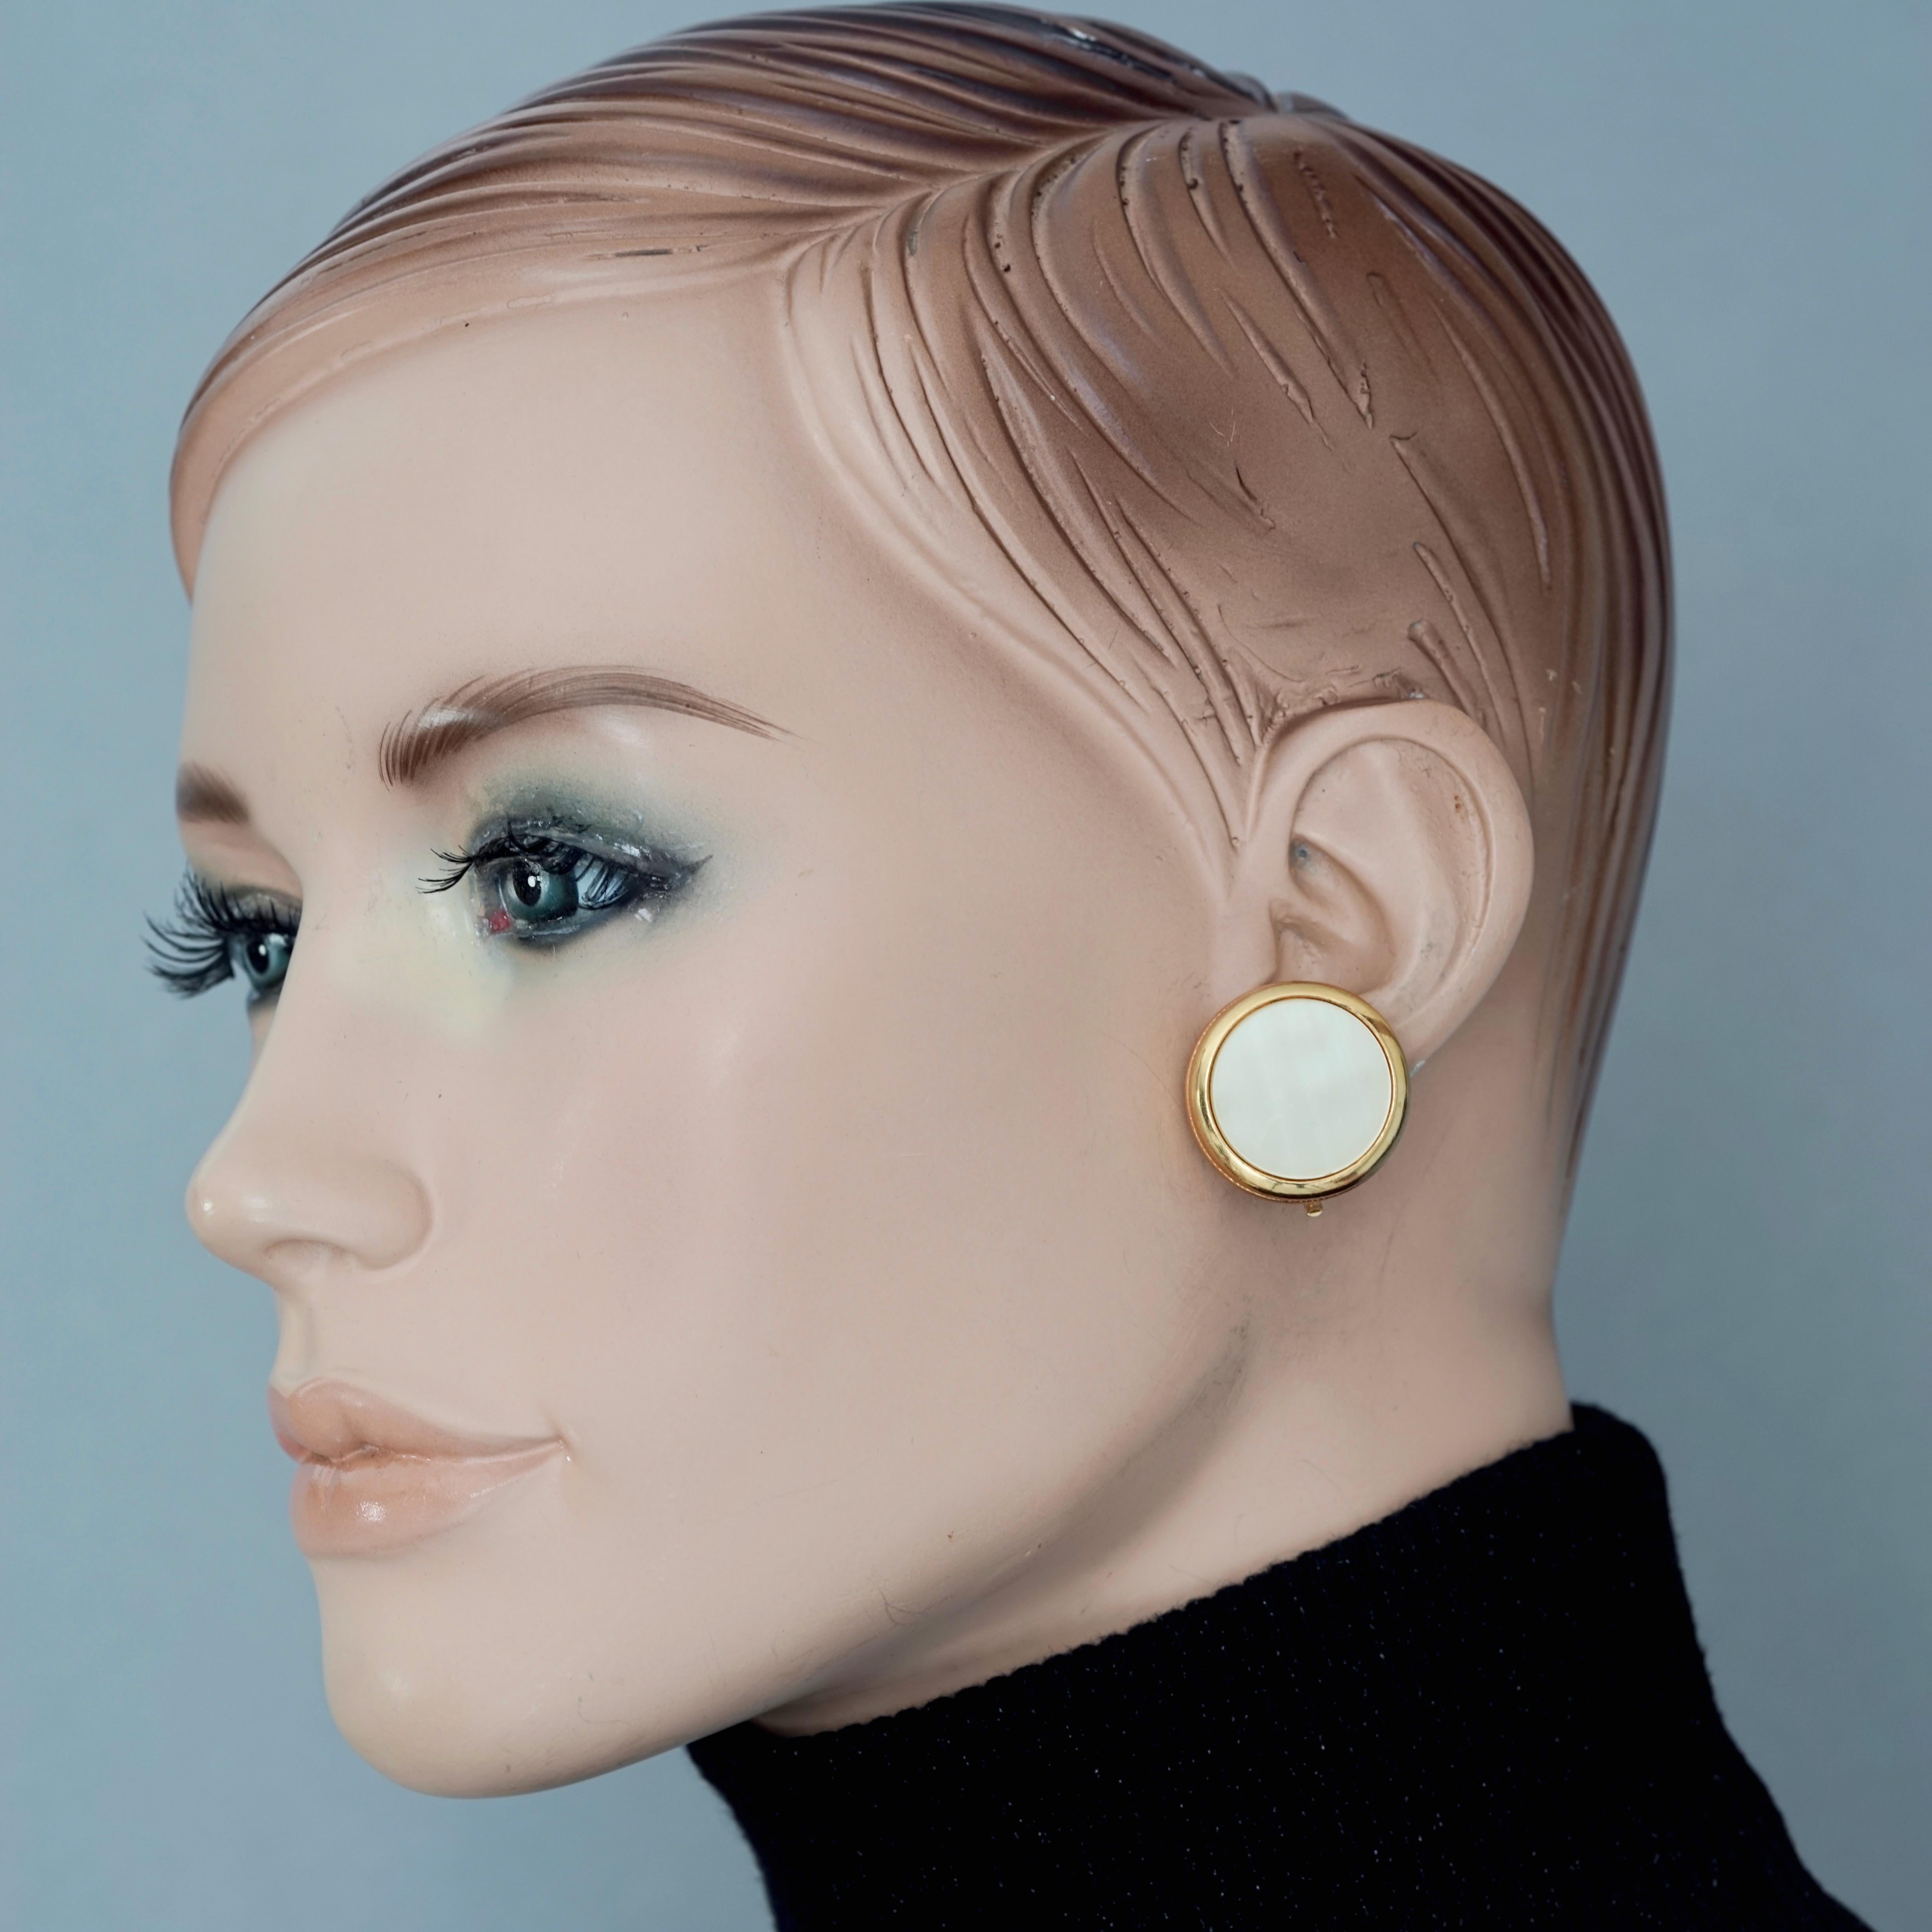 Vintage YVES SAINT LAURENT Ysl Nacre Disc Earrings

Measurements:
Height: 1 inch (2.5 cm)
Width: 1 inch (2.5 cm)
Weight: 16 grams

Features:
- 100% Authentic YVES SAINT LAURENT.
- Round mother of pearl/ nacre earrings.
- Gold tone hardware.
- Signed